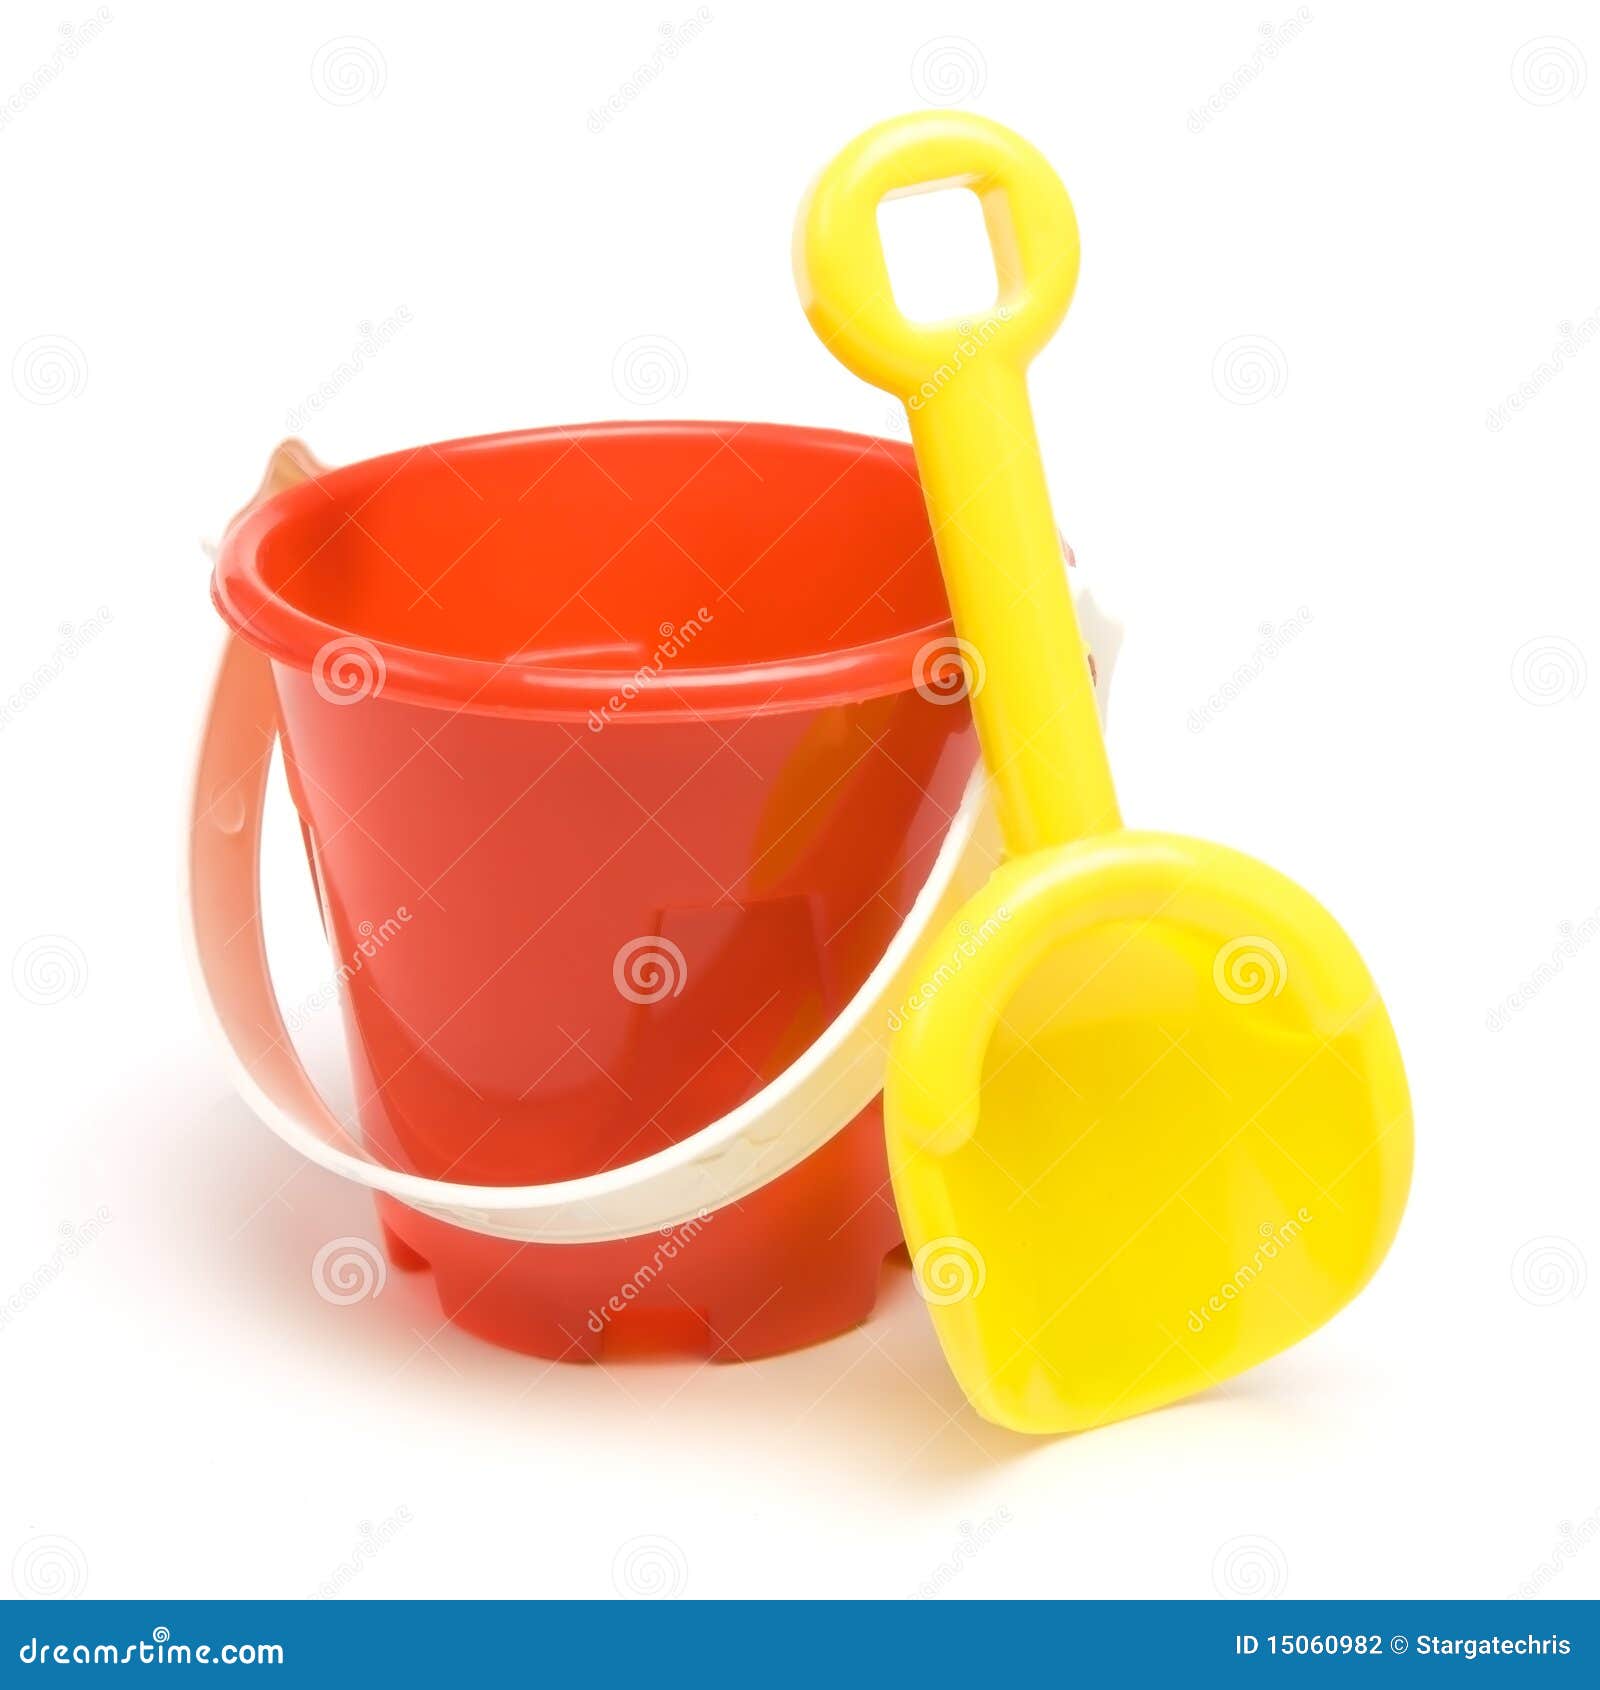 travel bucket and spade